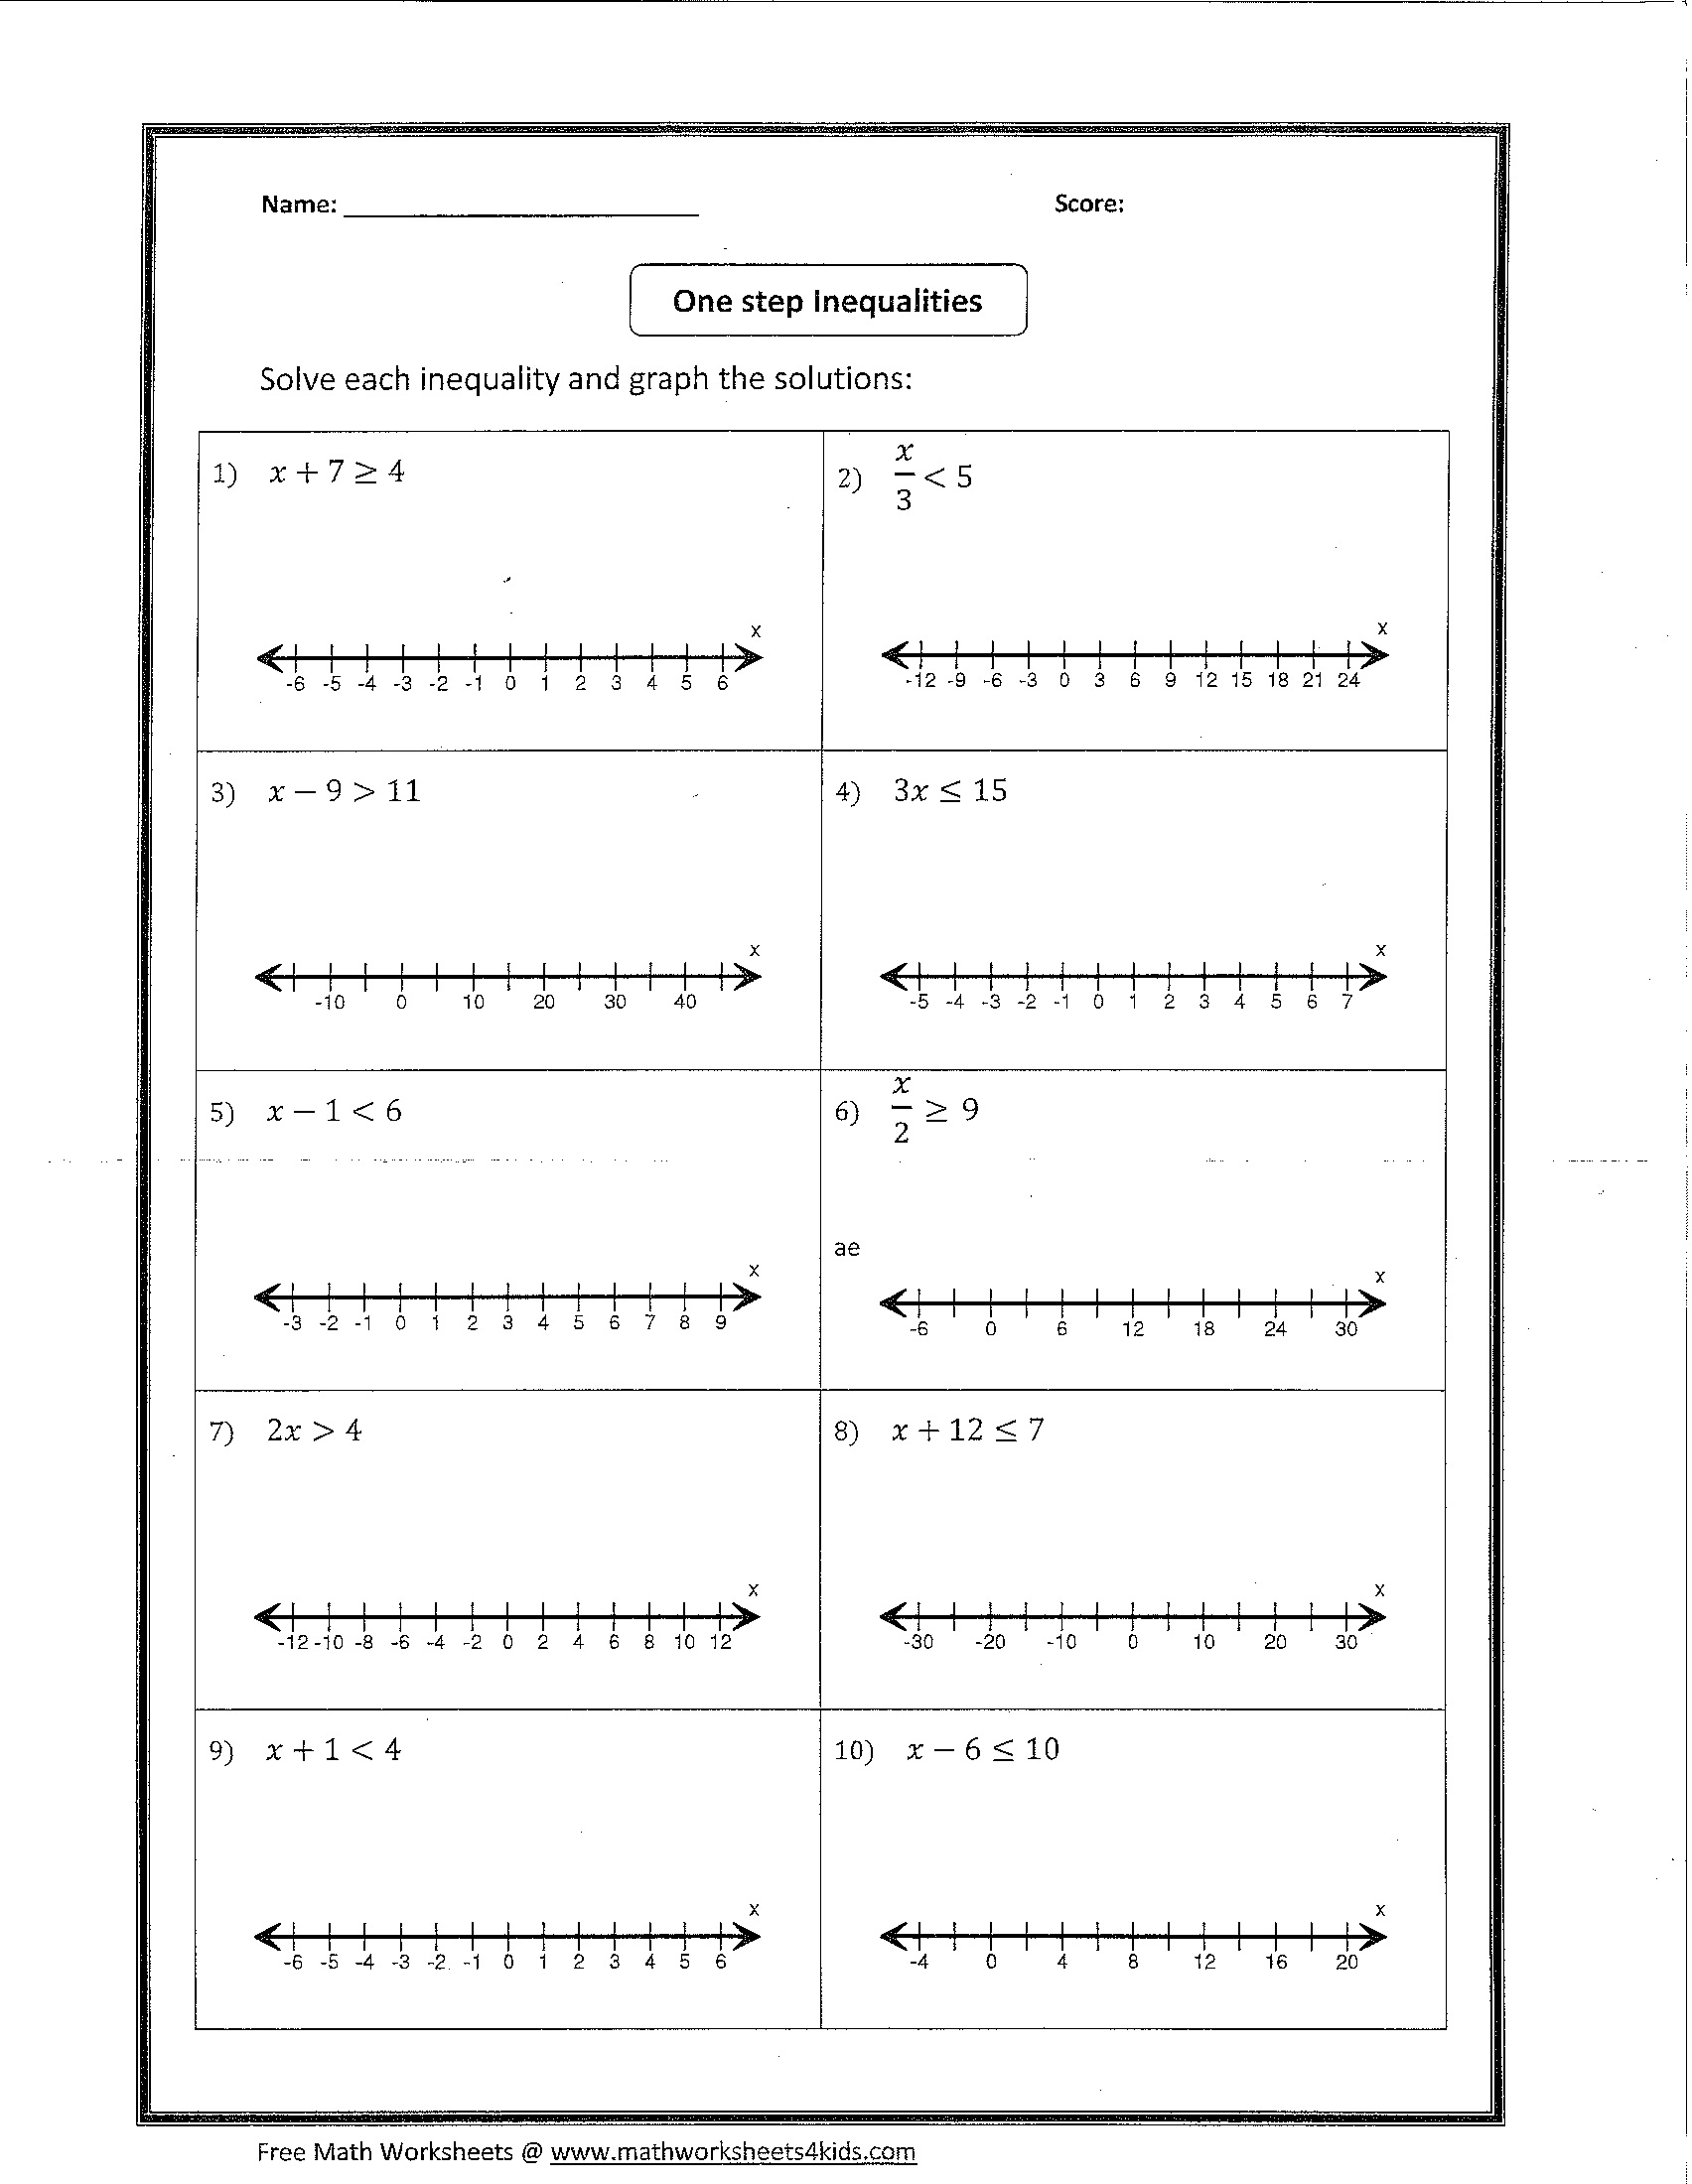 8-best-images-of-graphing-inequalities-on-a-number-line-worksheets